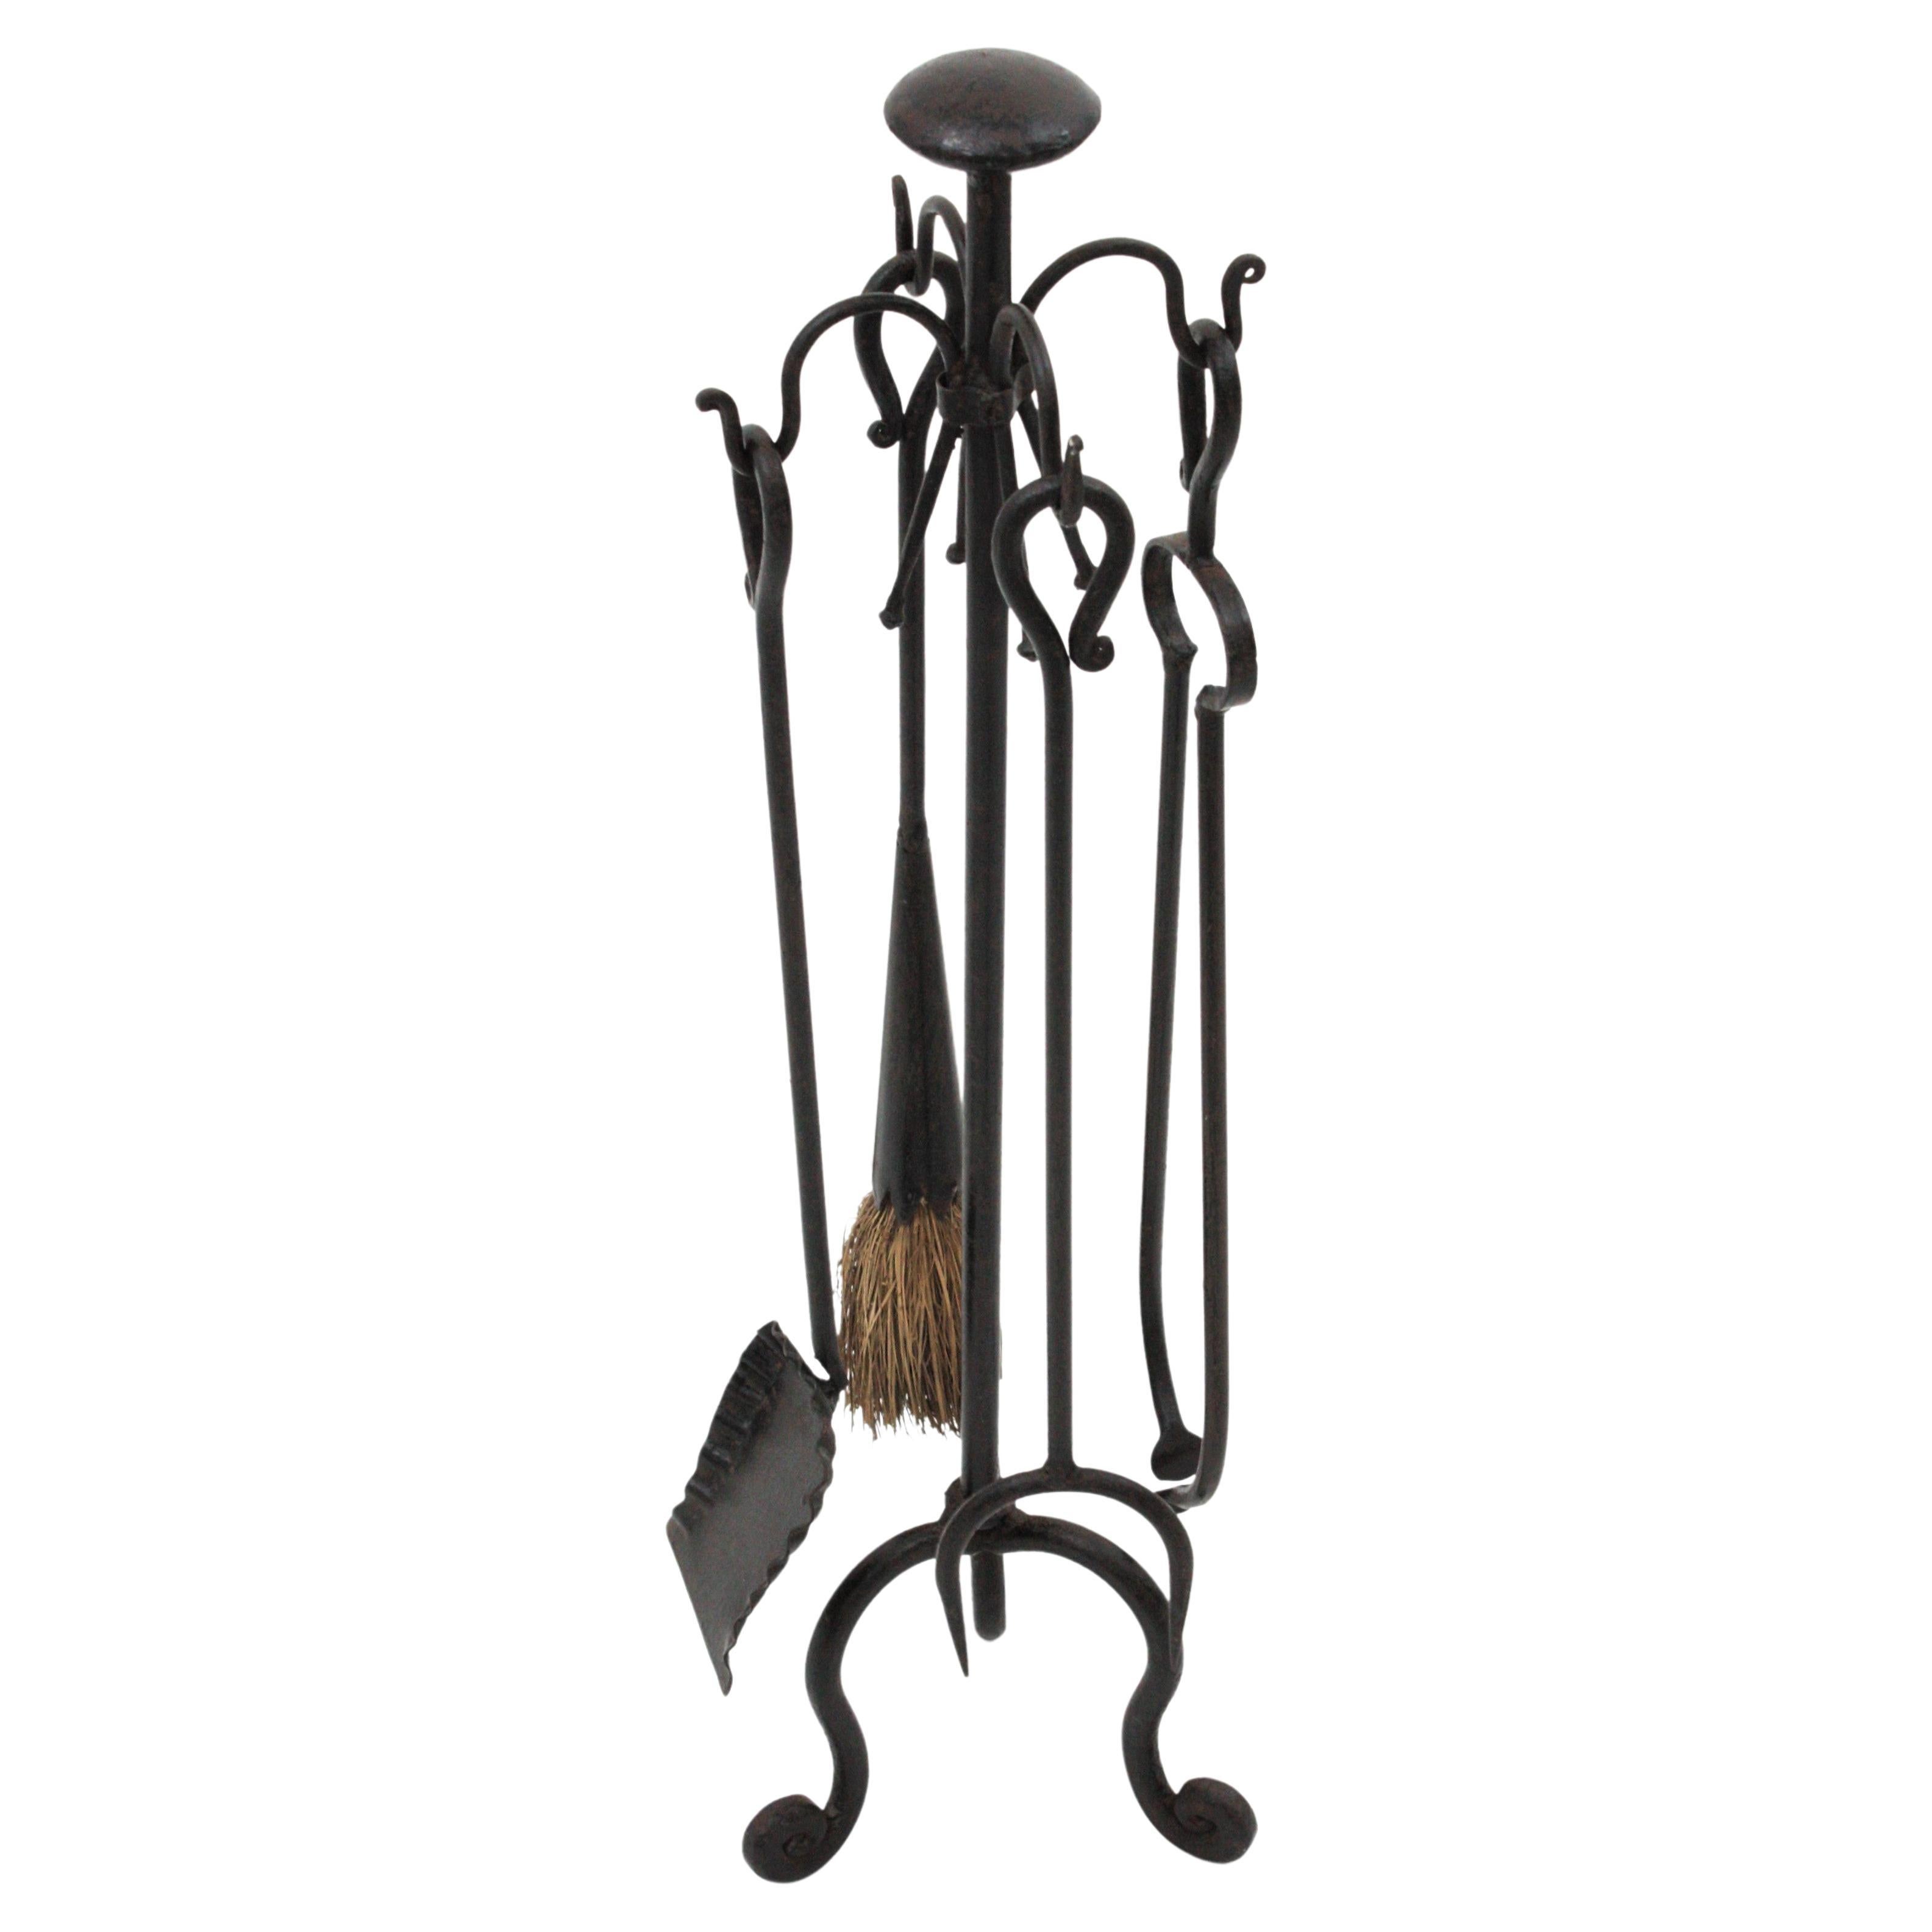  Spanish Gothic Revival Fireplace Tools Set Stand in Wrought Iron For Sale